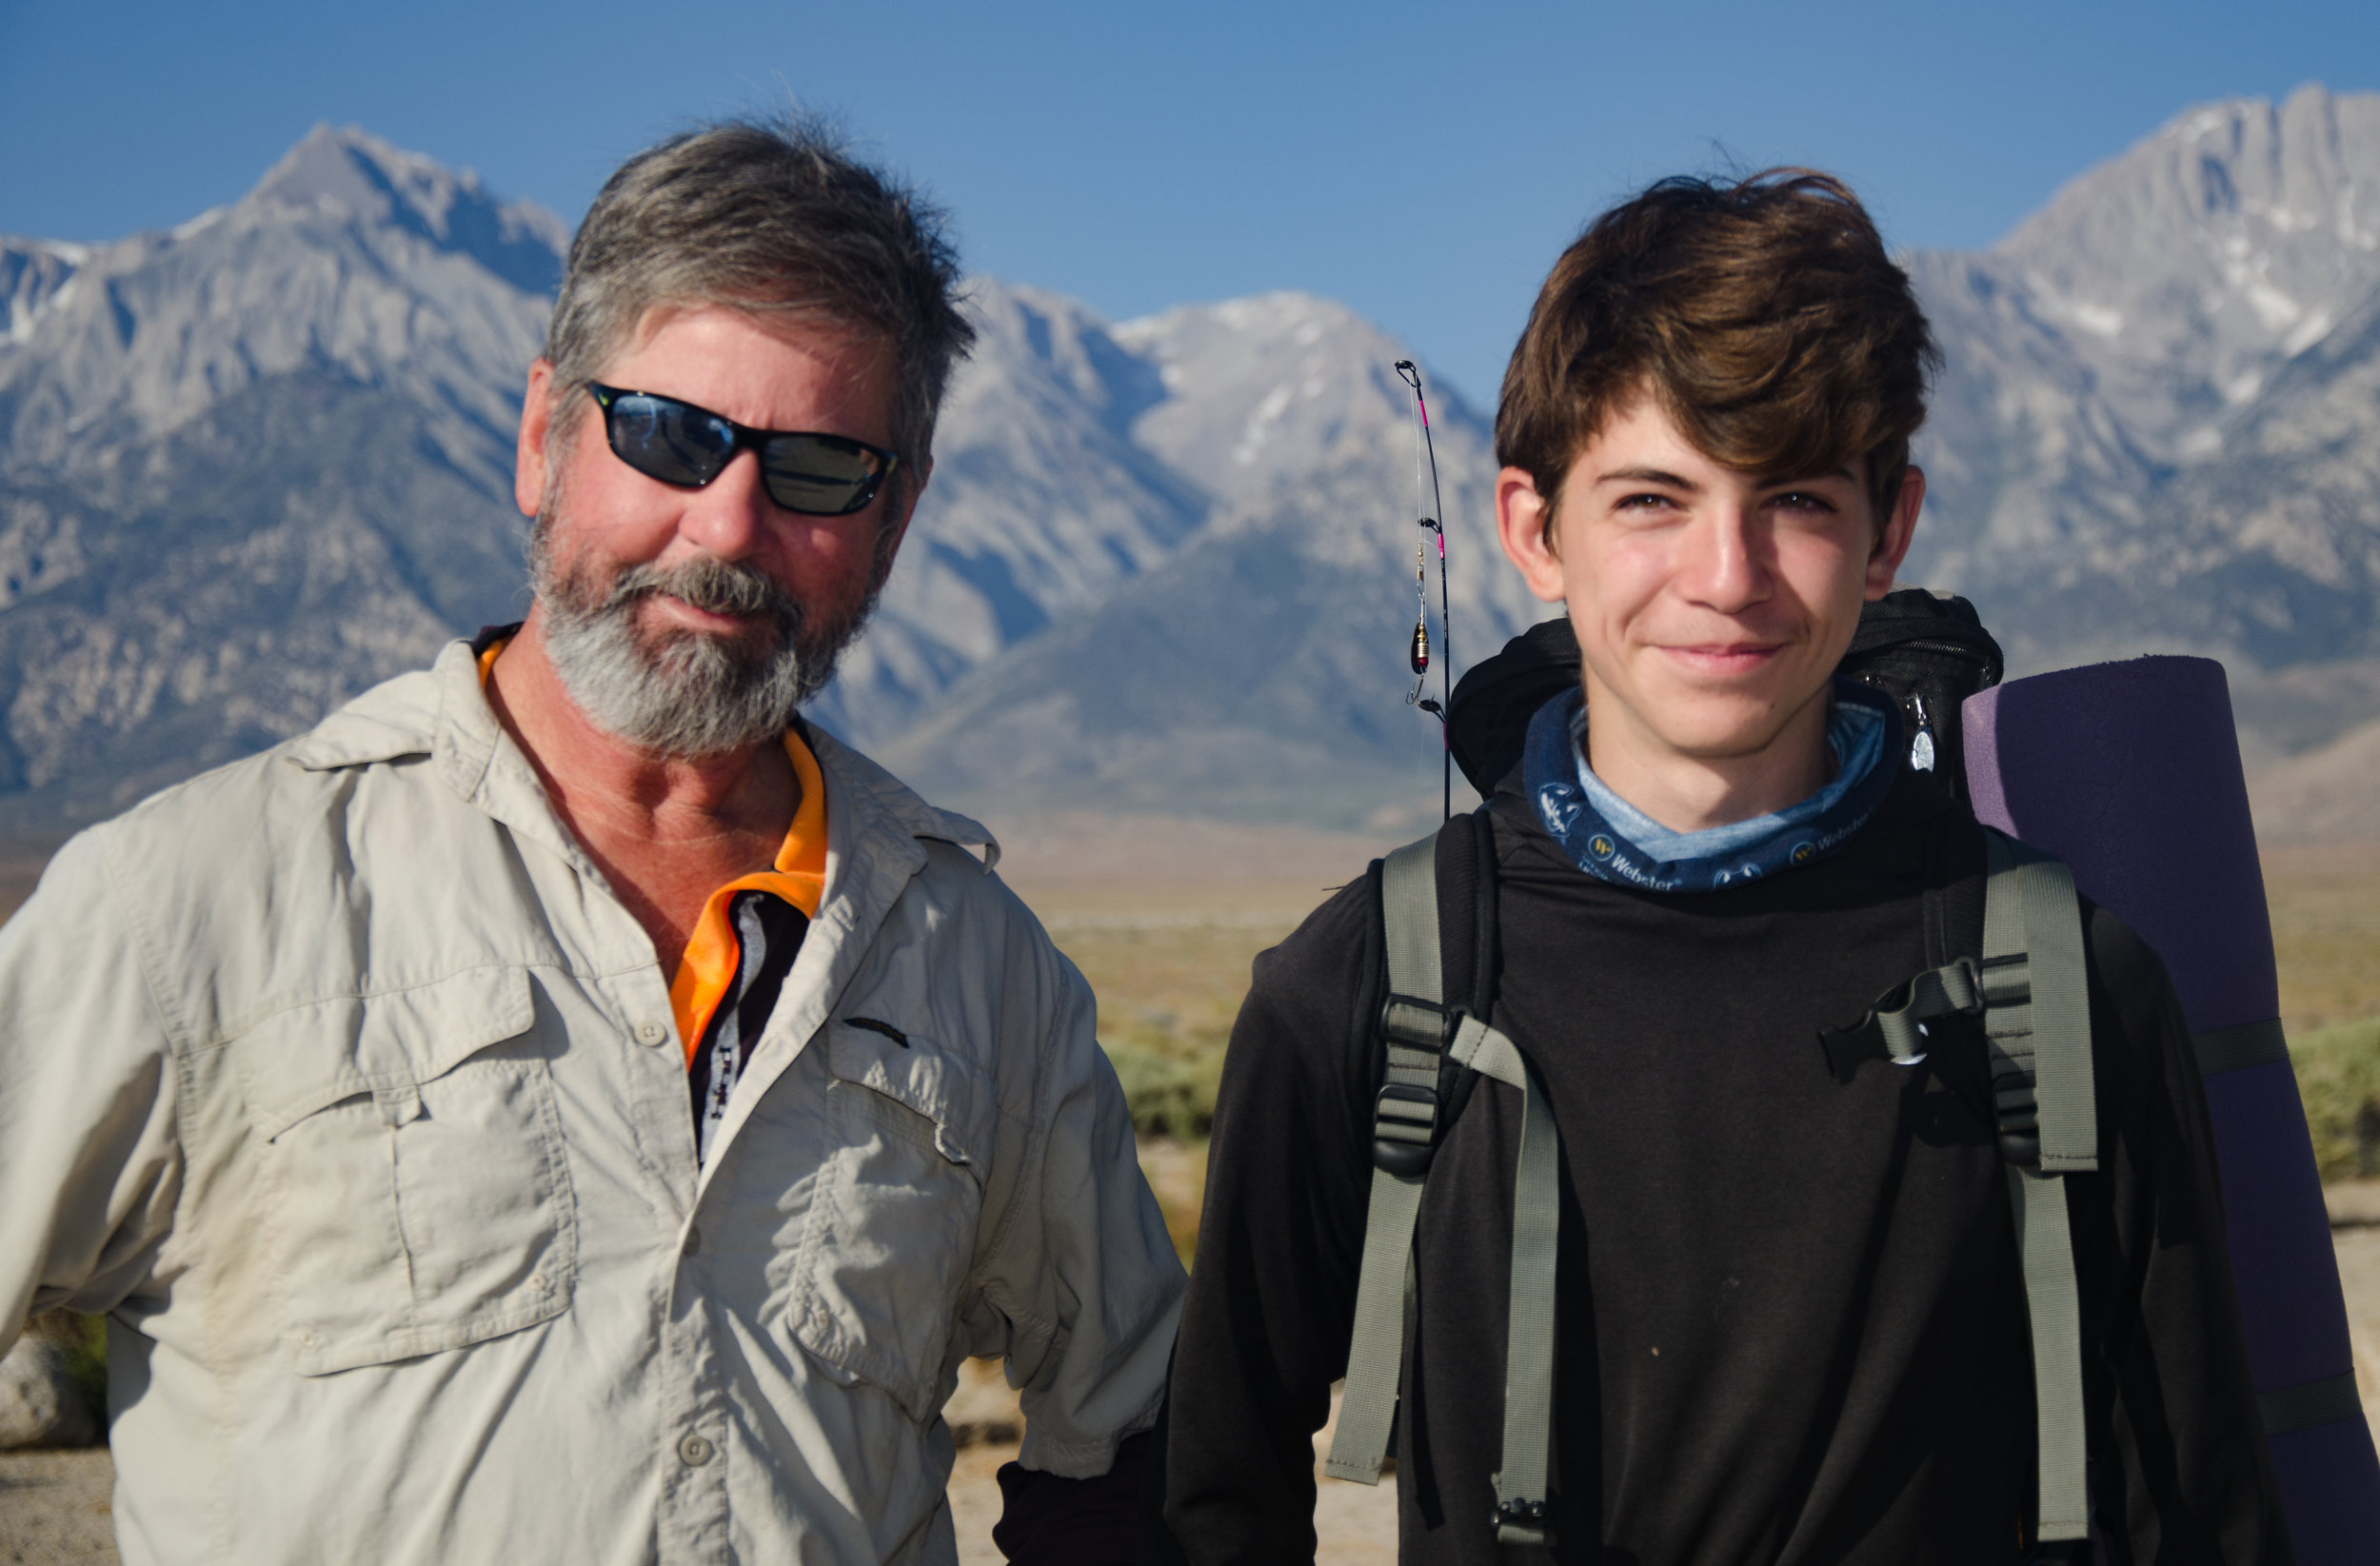 JMT hikers Mark and his Grandson